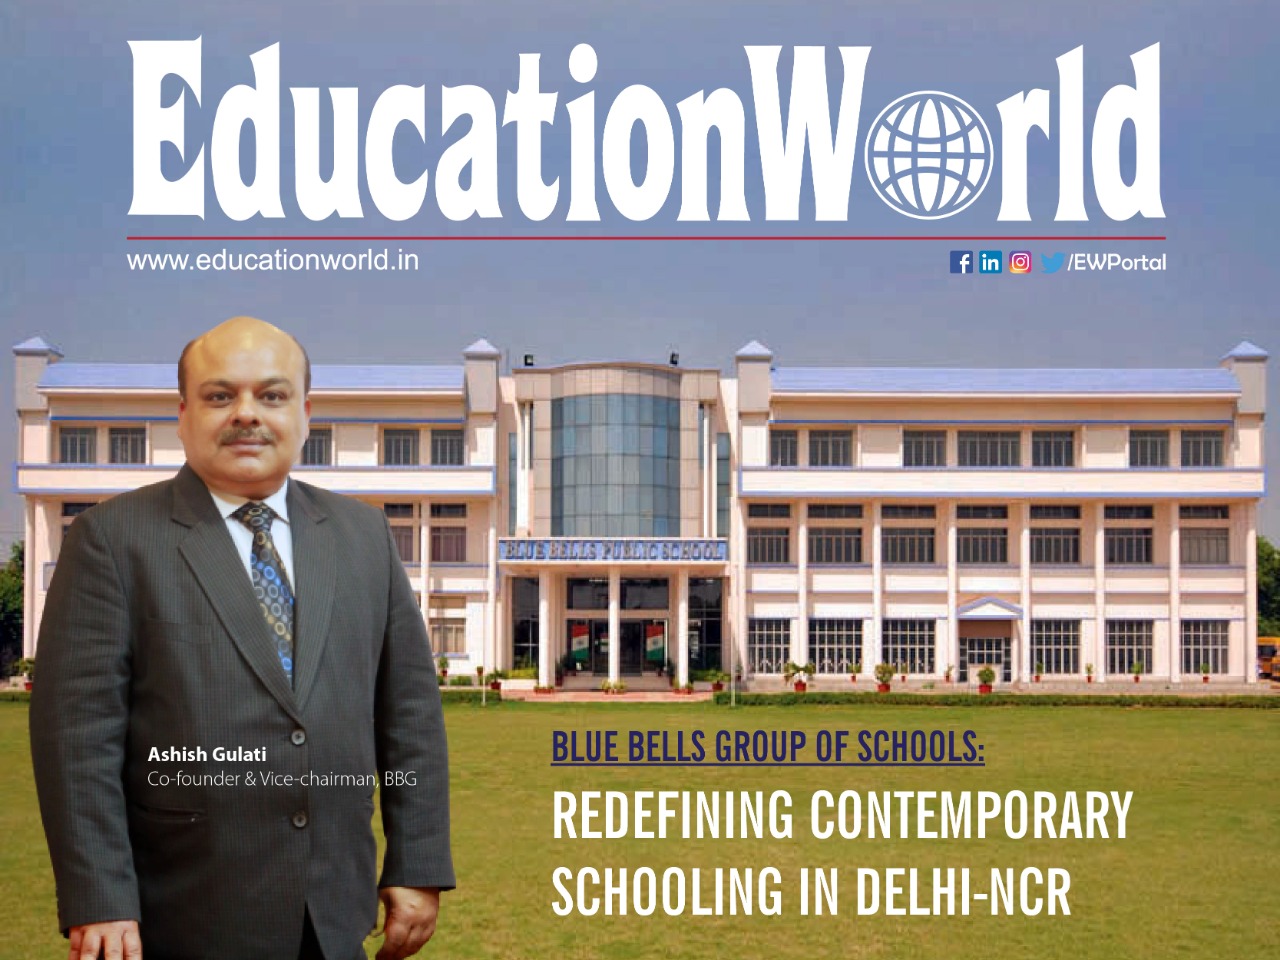 BLUE BELLS GROUP OF SCHOOLS : REDIFINING CONTEMPORARY SCHOOLING IN DELHI-NCR